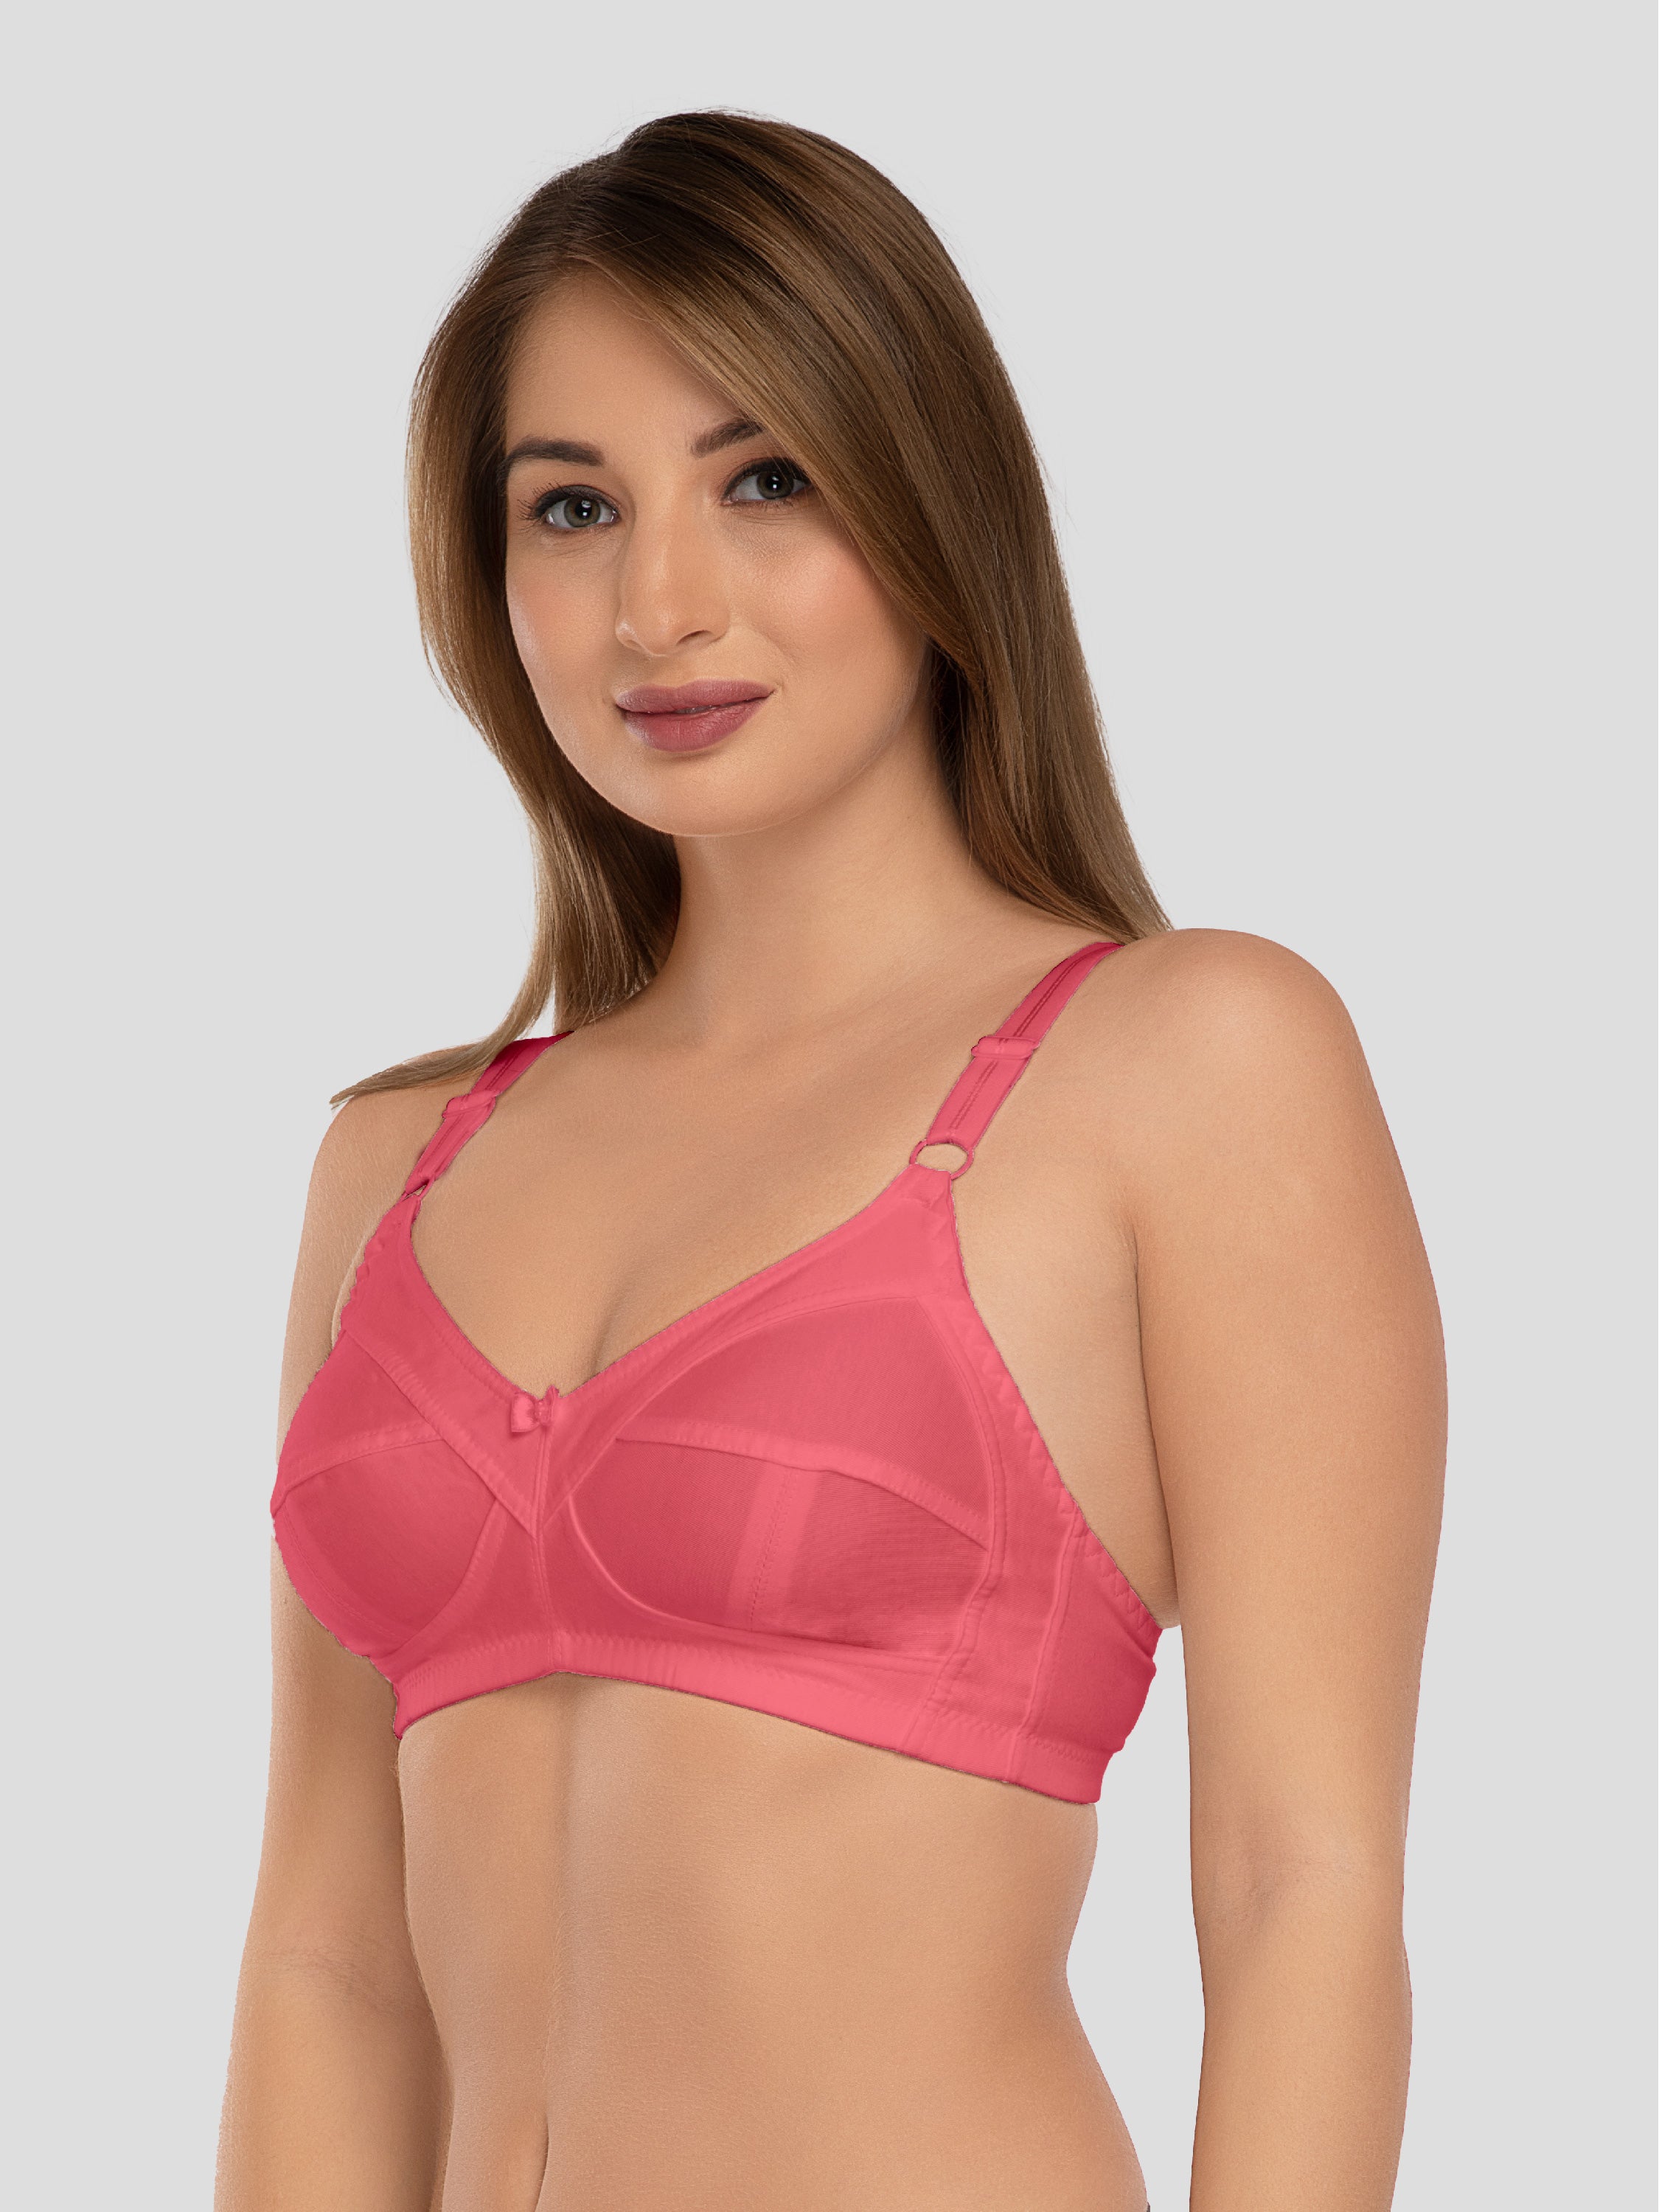 Daisy Dee Carrot Non Padded Non Wired Full Coverage Bra NSHPU-Carrot